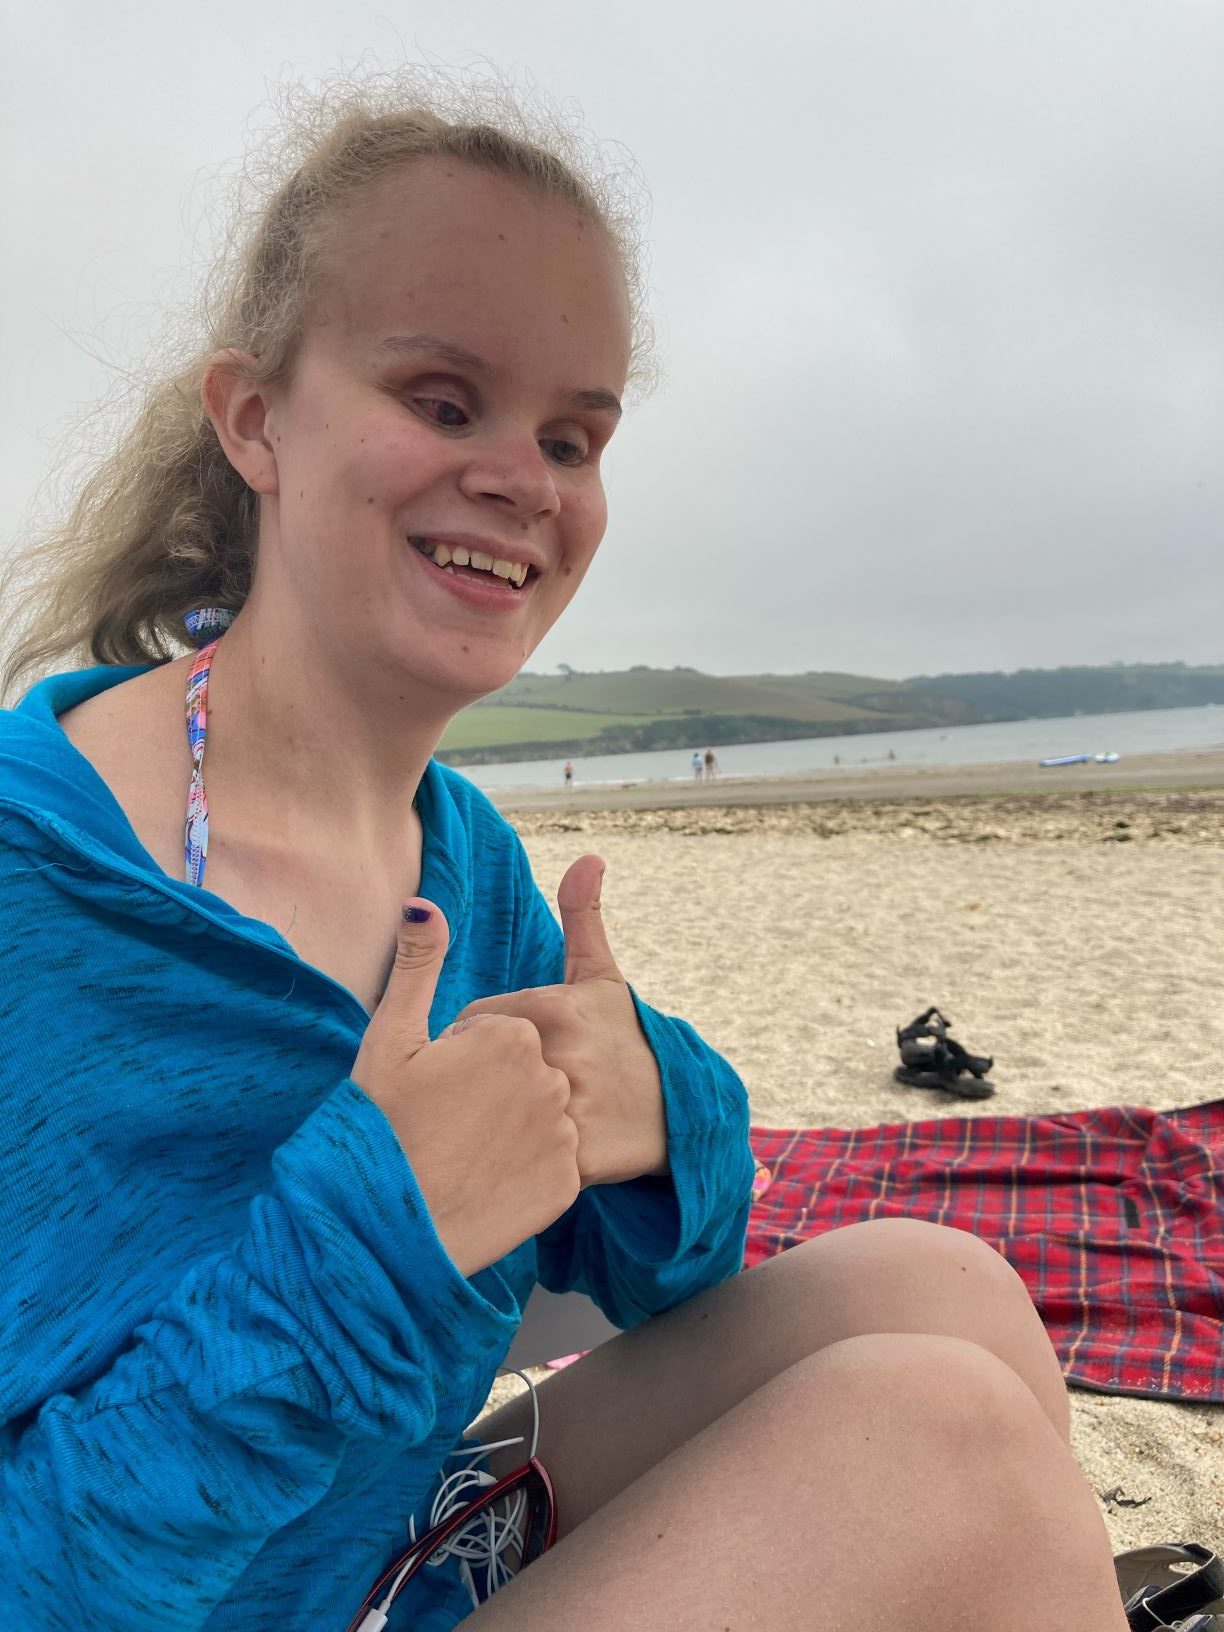 Martha Page smiling on a beach with a thumbs up